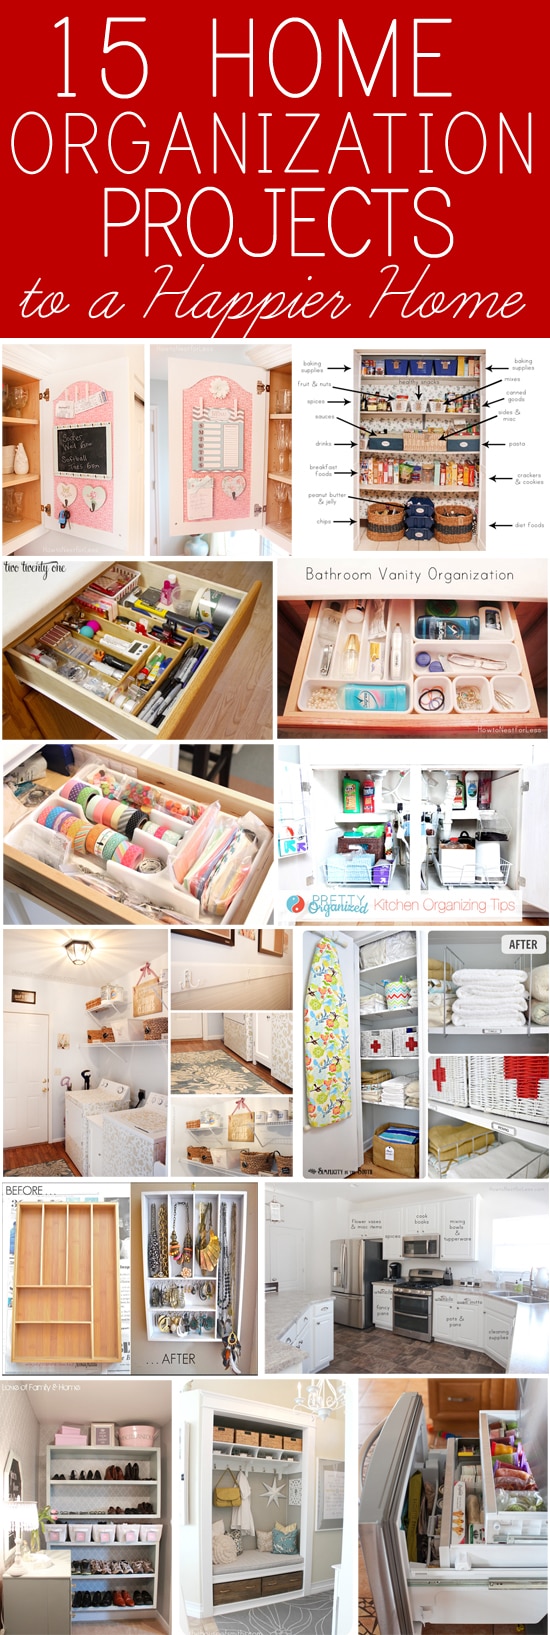 15 home organization projects